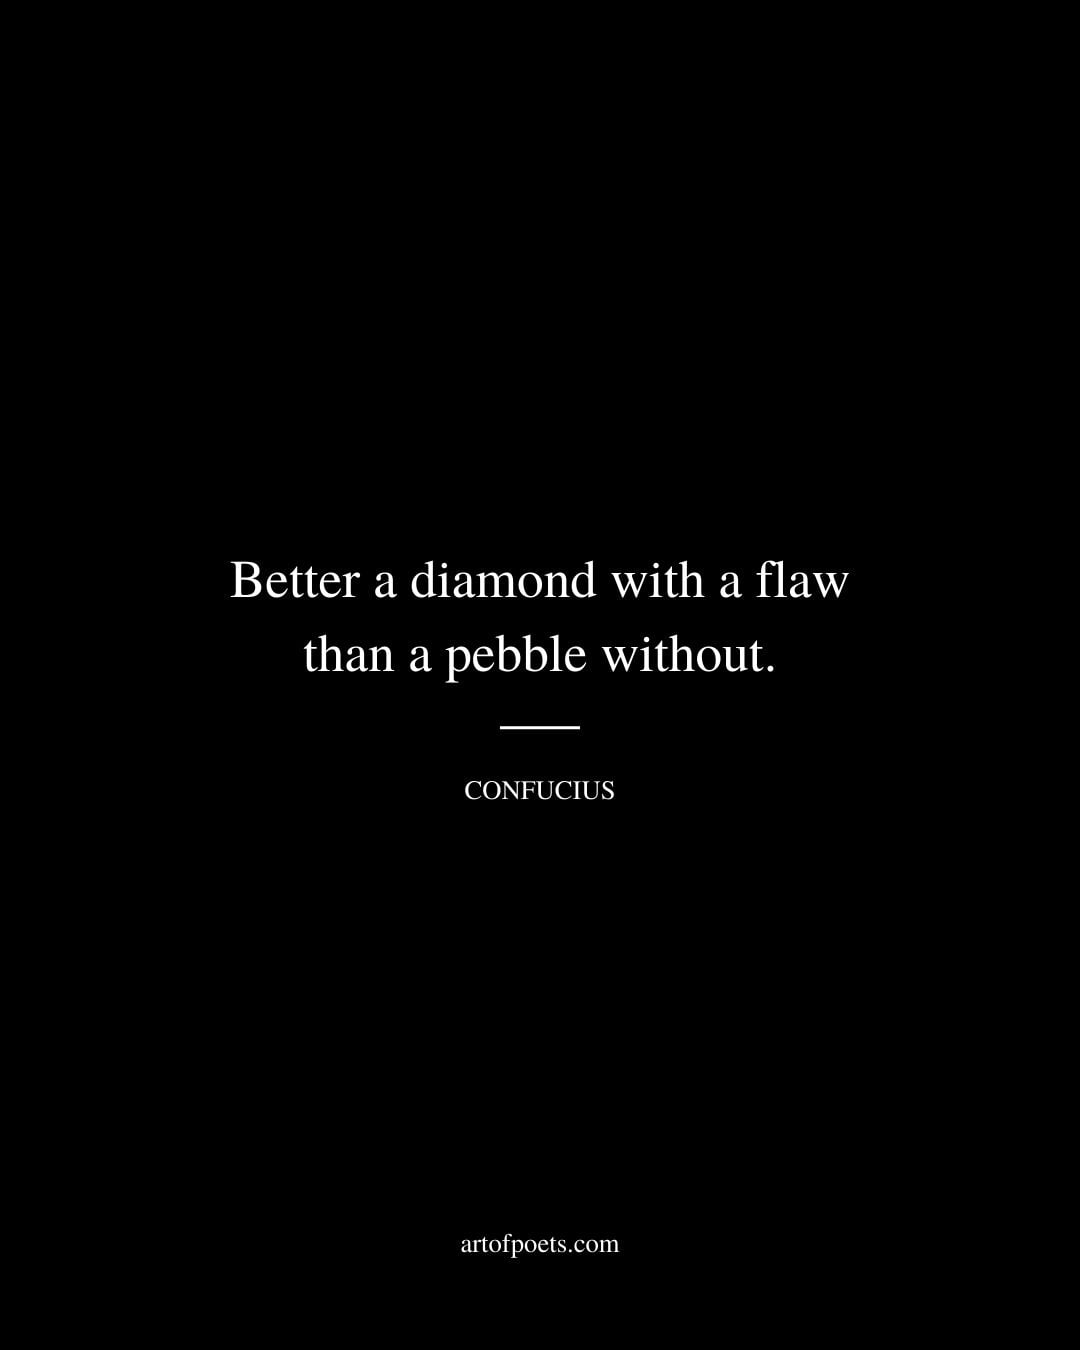 Better a diamond with a flaw than a pebble without